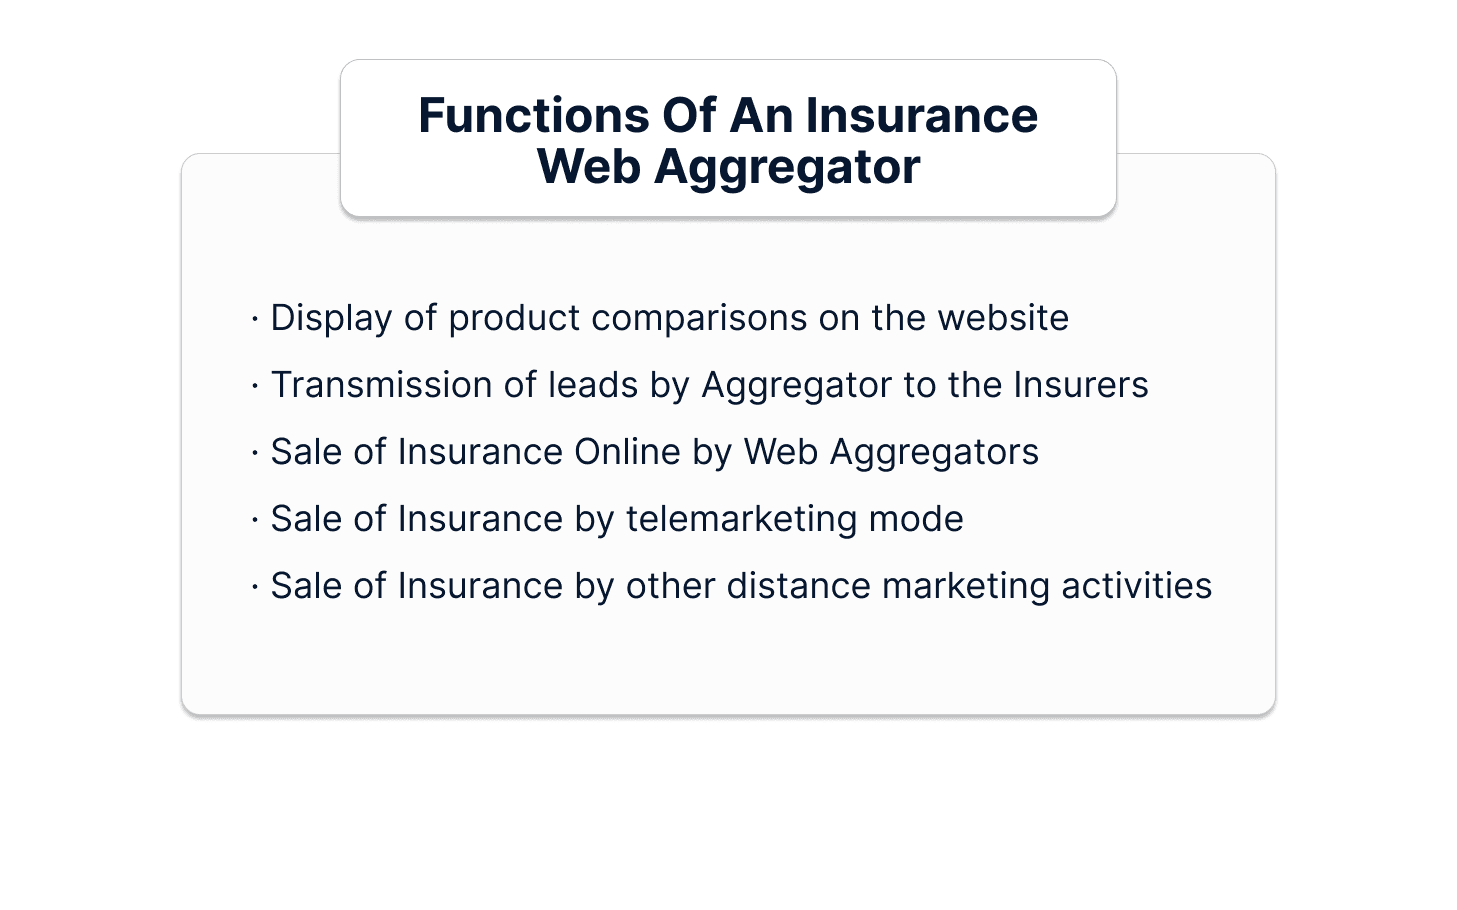 Functions of an Insurance Web Aggregator